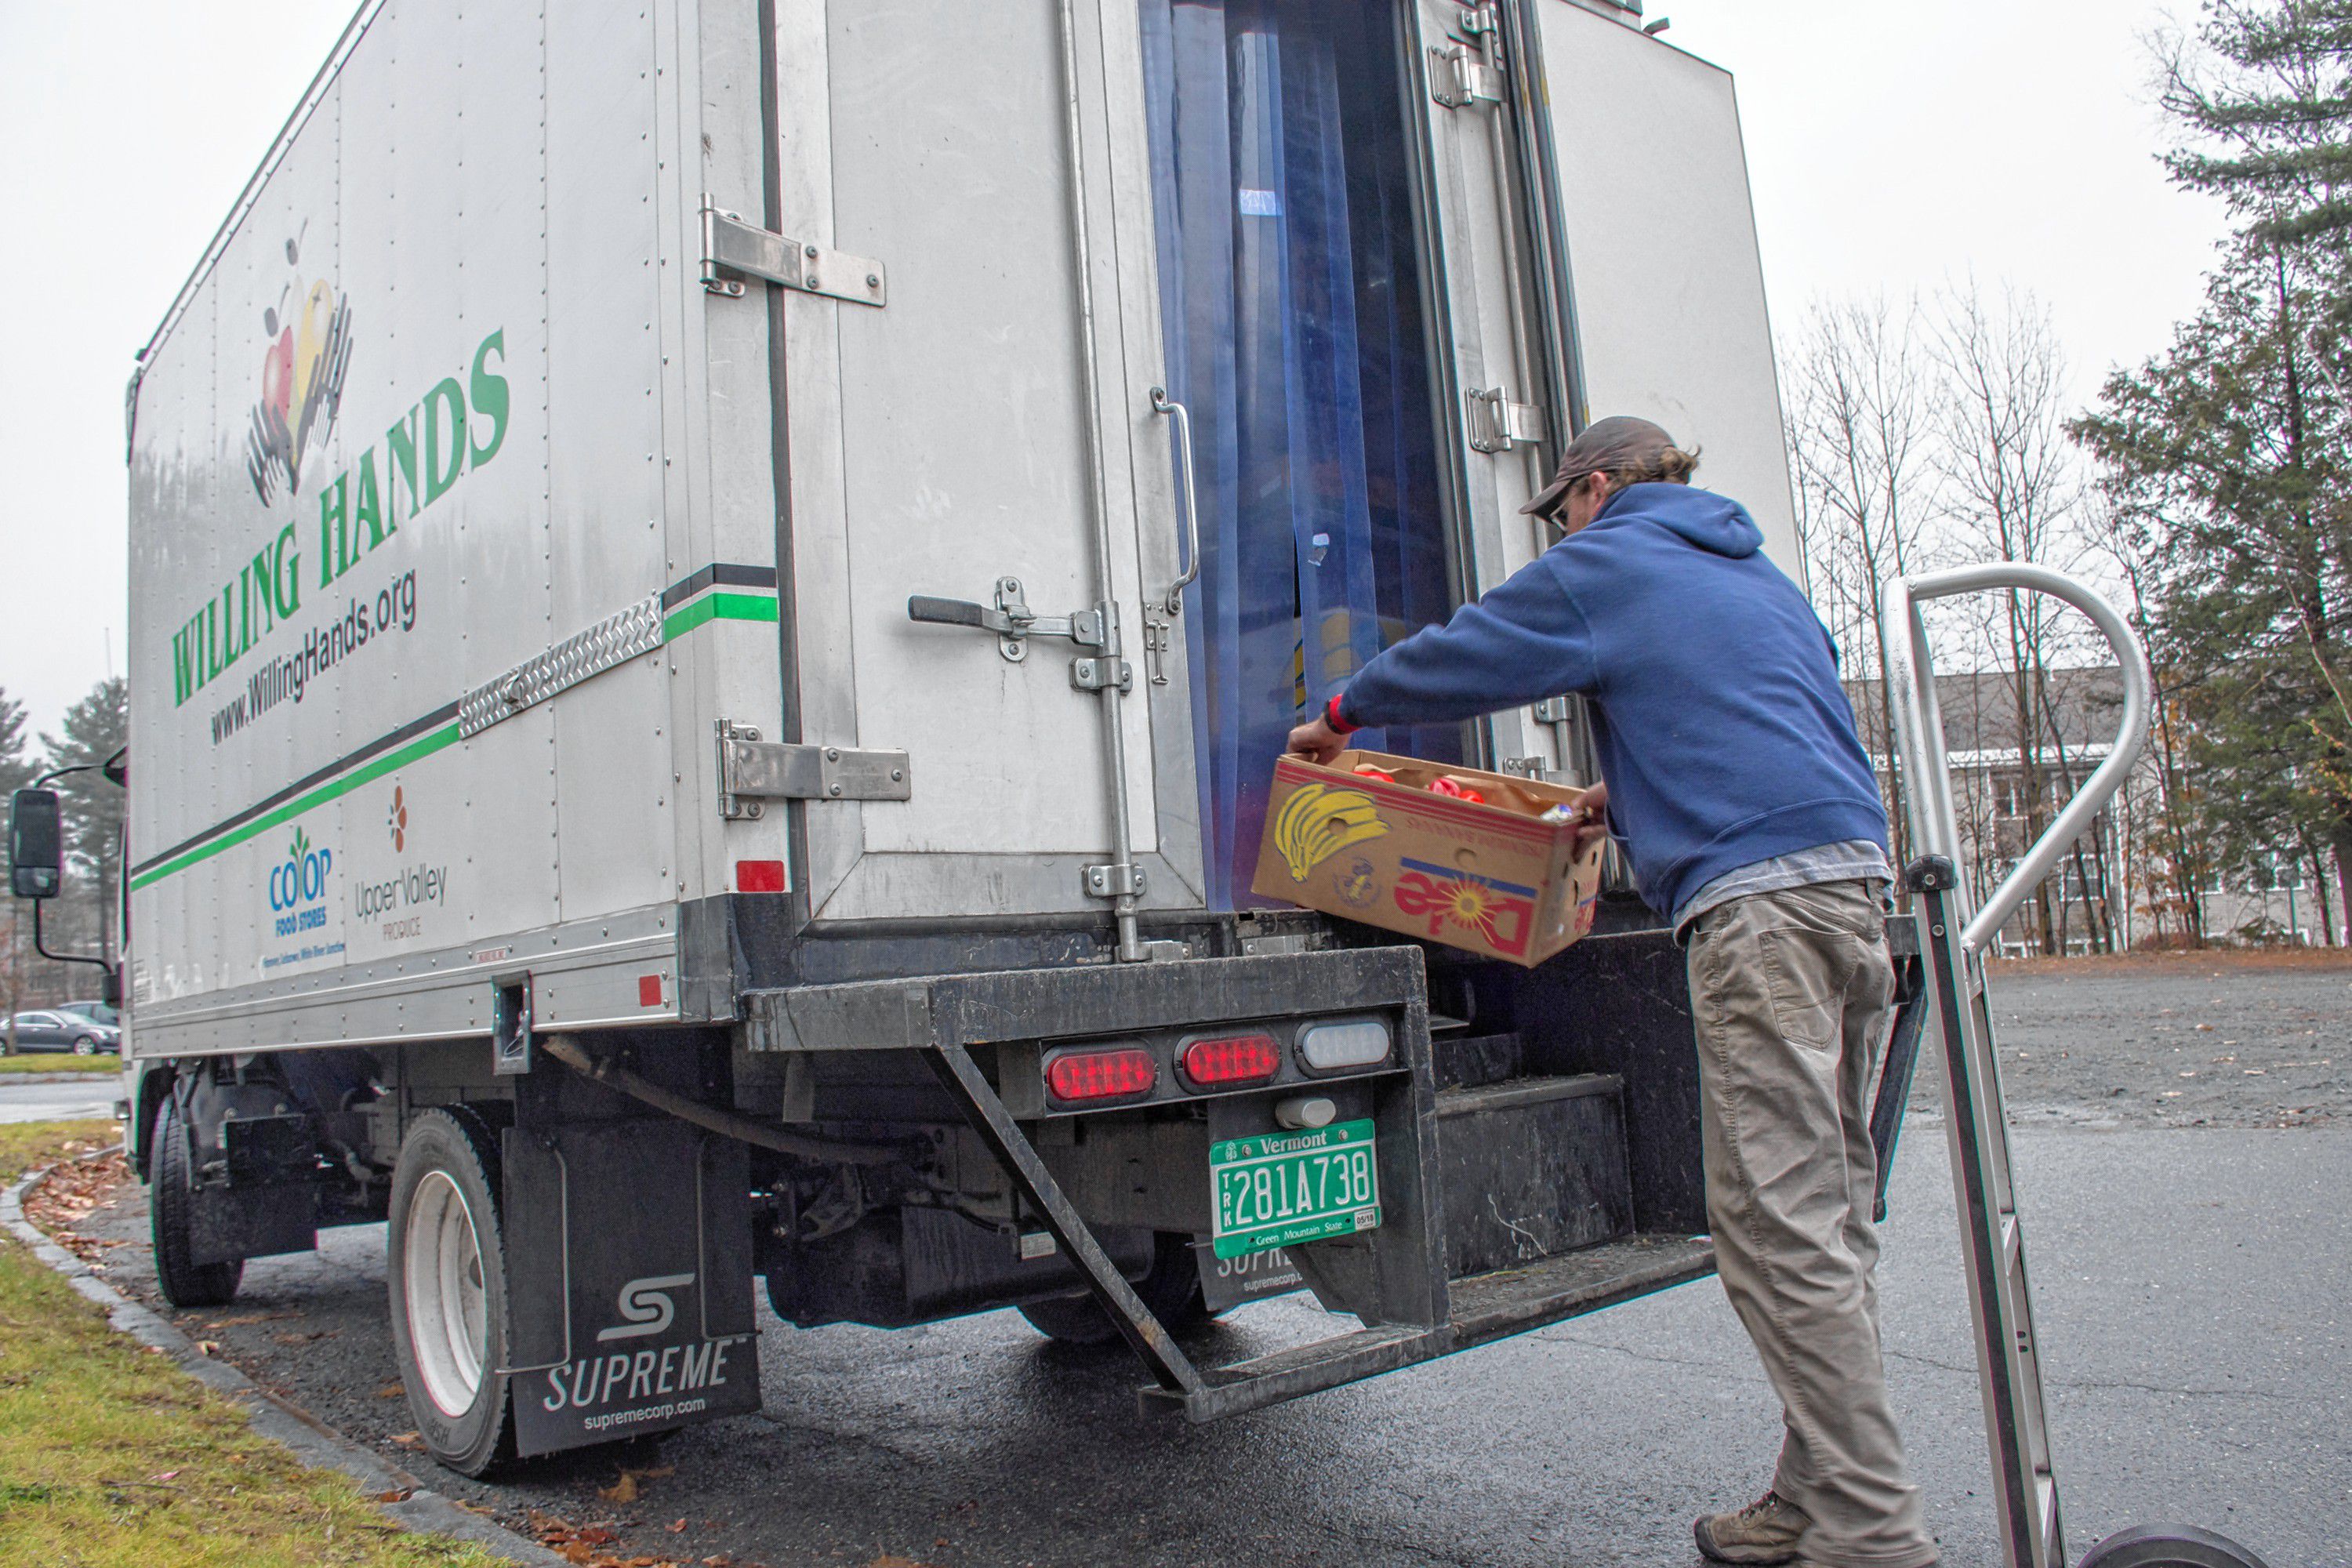 Chris Castles from Corinth, Vt. loads up the Willing Hands truck at the Lebanon Co-Op store. Next stop the Hanover Co-Op store. Nancy Nutile-McMenemy photograph.